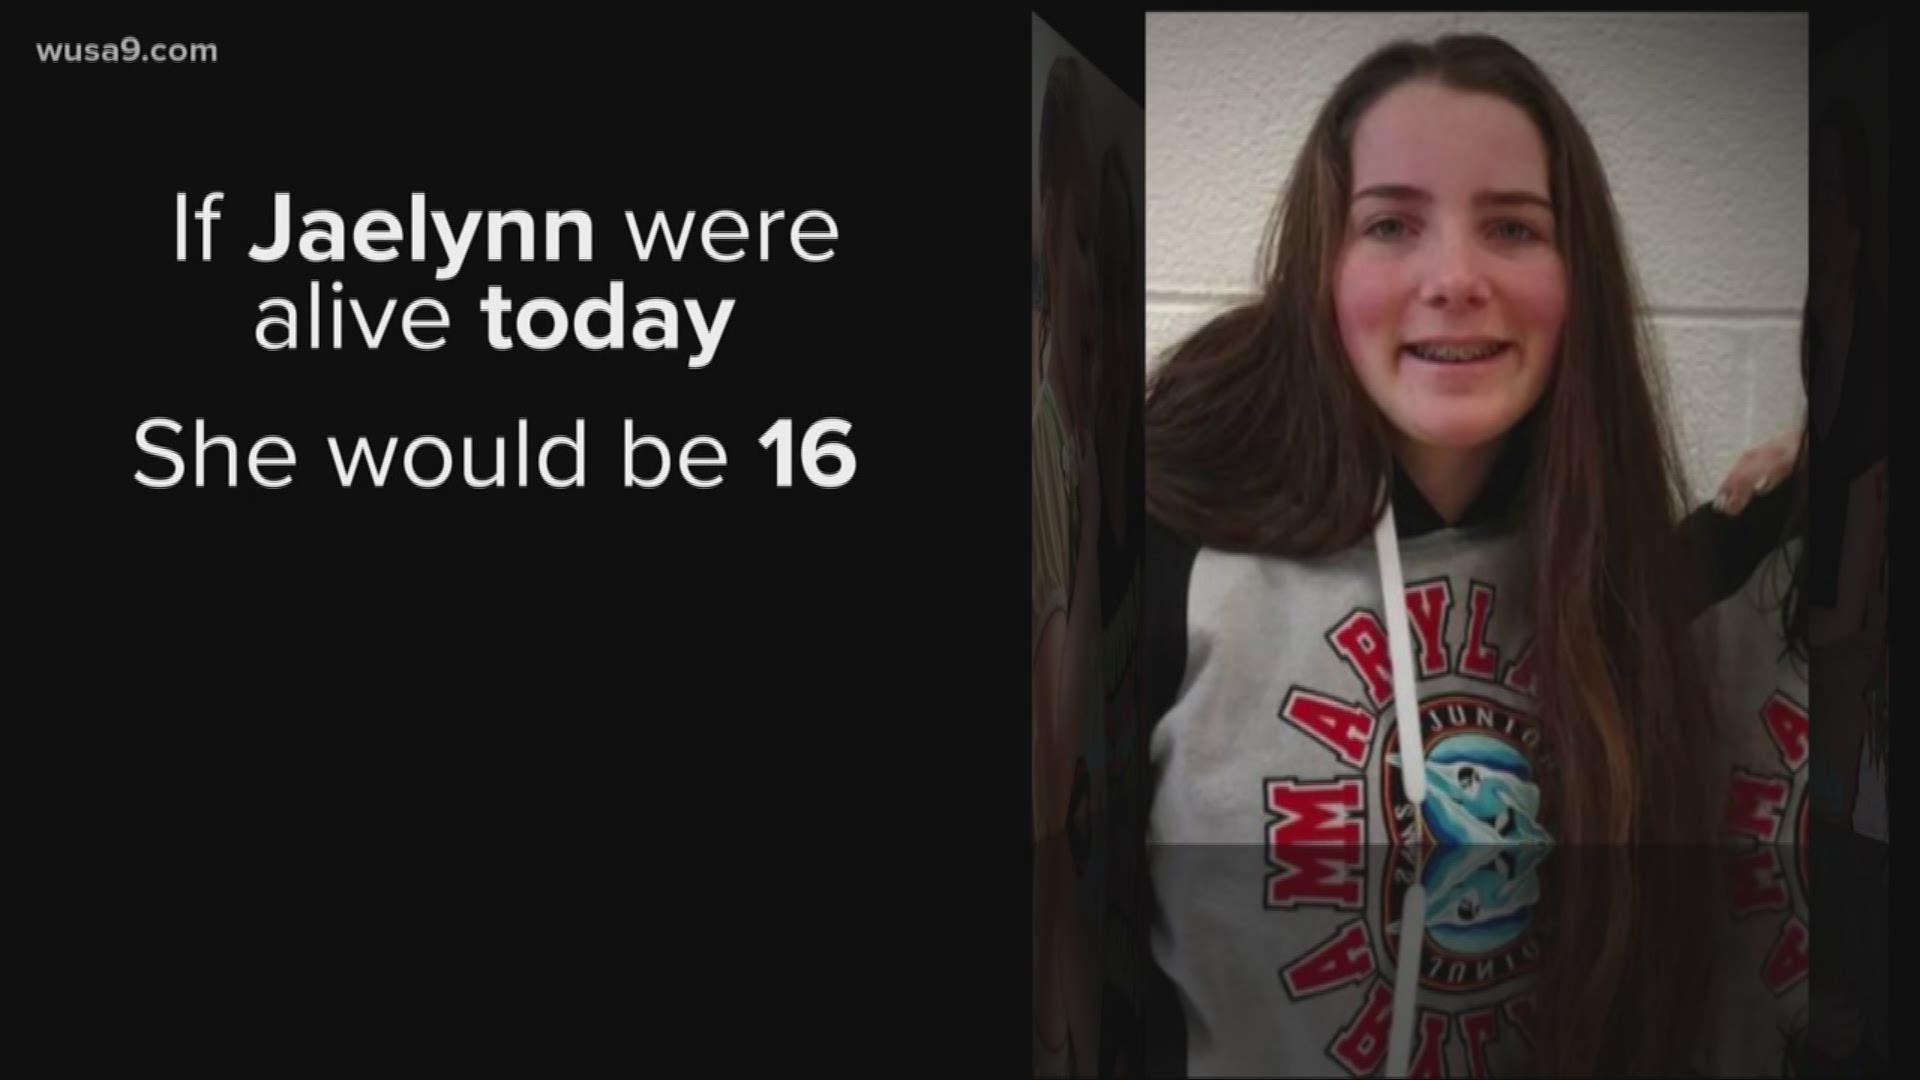 Last March, a teenager with a gun walked into his school and shot and killed a 16-year-old girl named Jaelynn Willey.